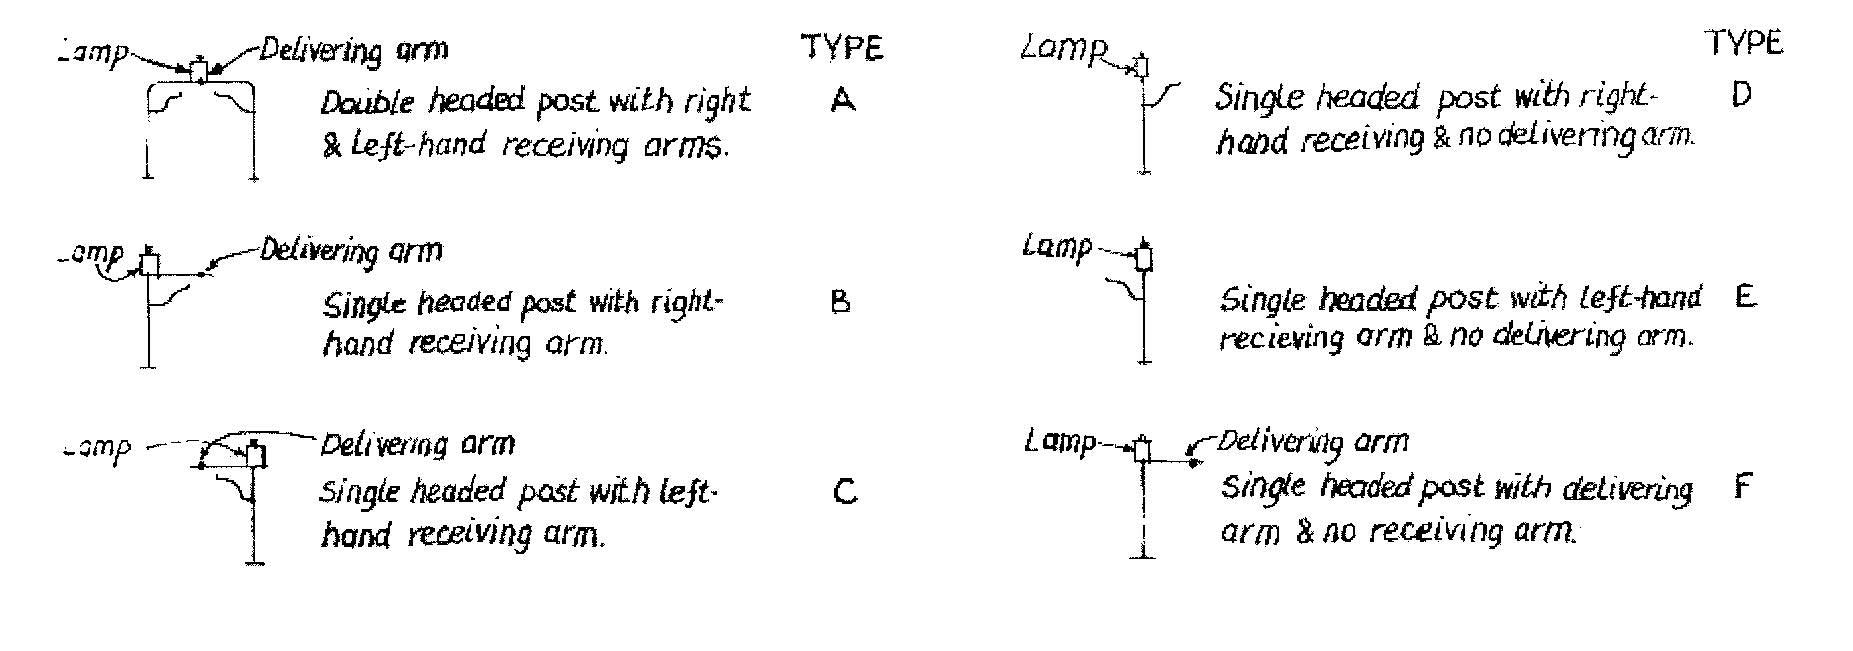 Diagrams of the types of arrangement for Bryson apparatus